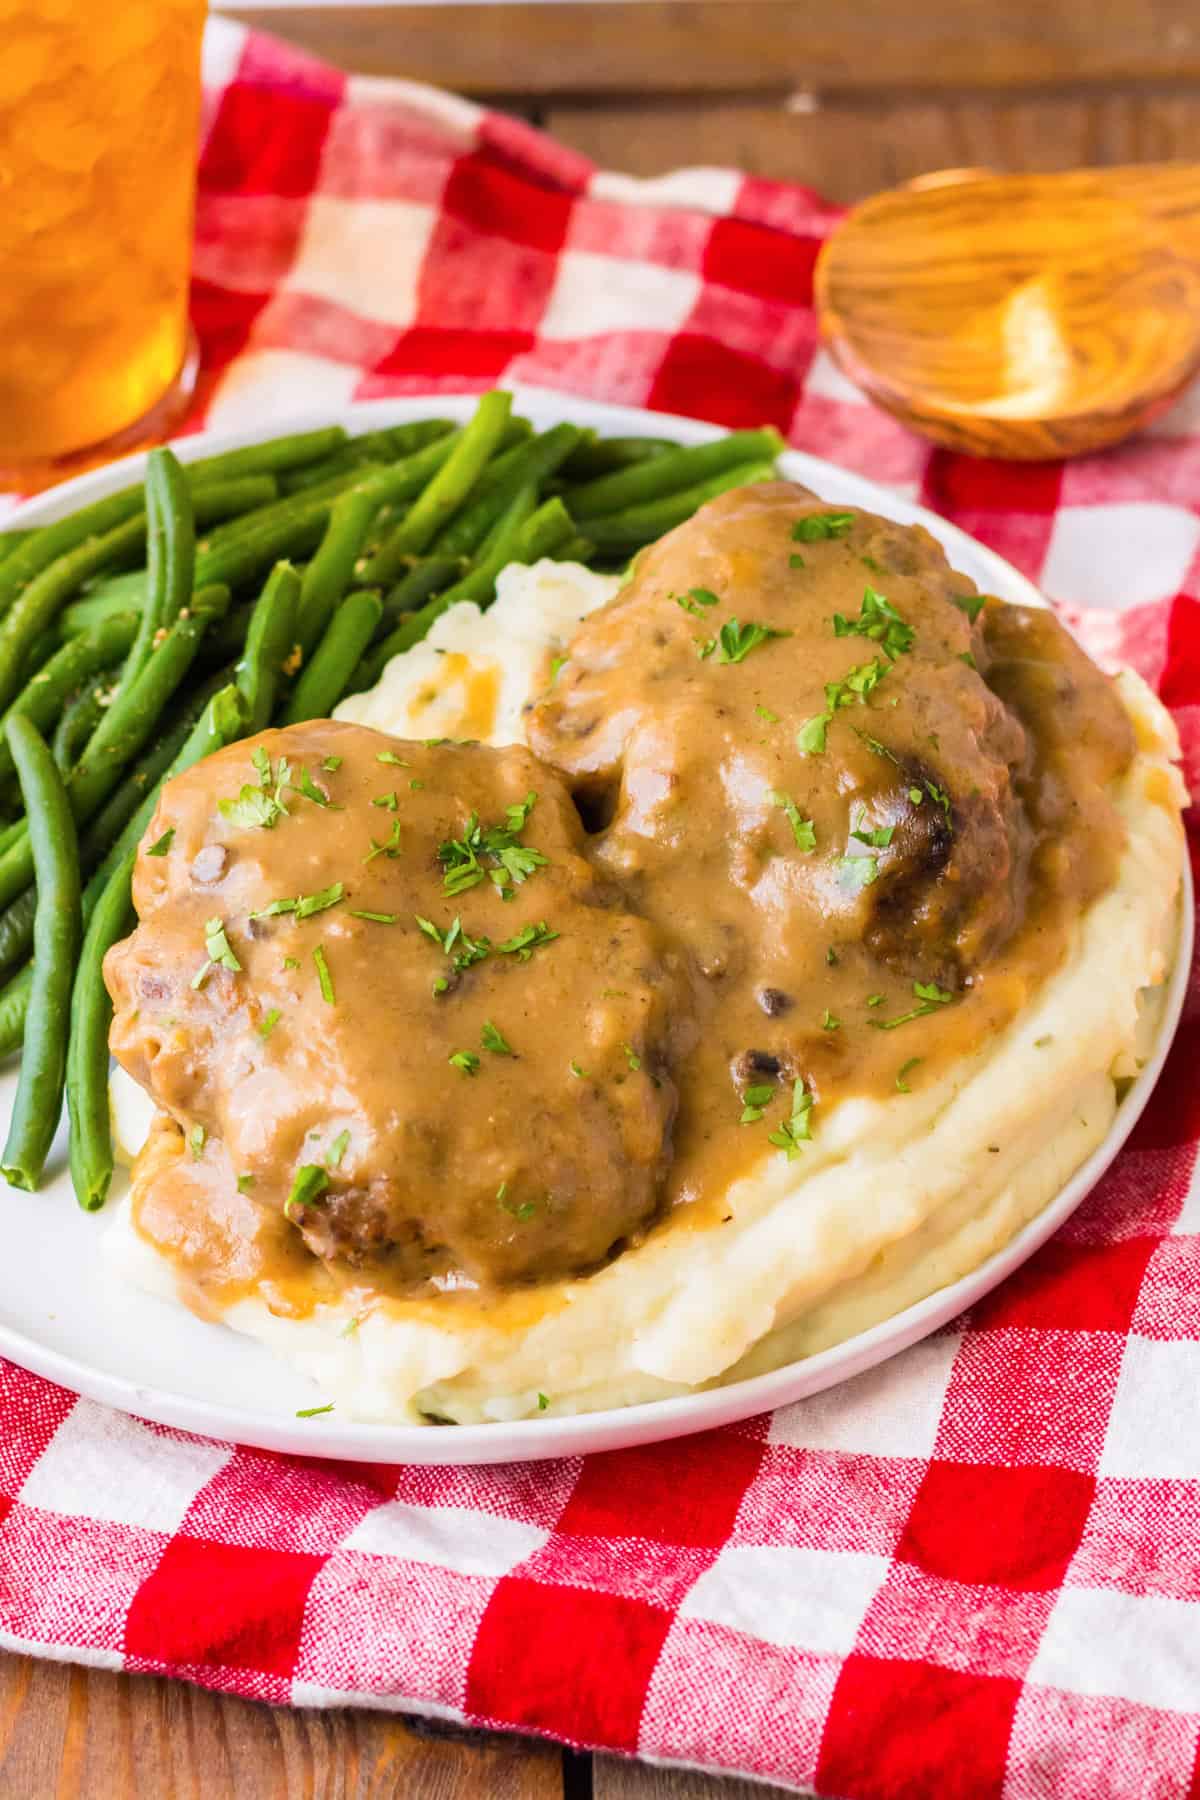 Slow cooker salisbury steaks smothered with brown gravy over a bed of mashed potatoes and served with a side of string beans.